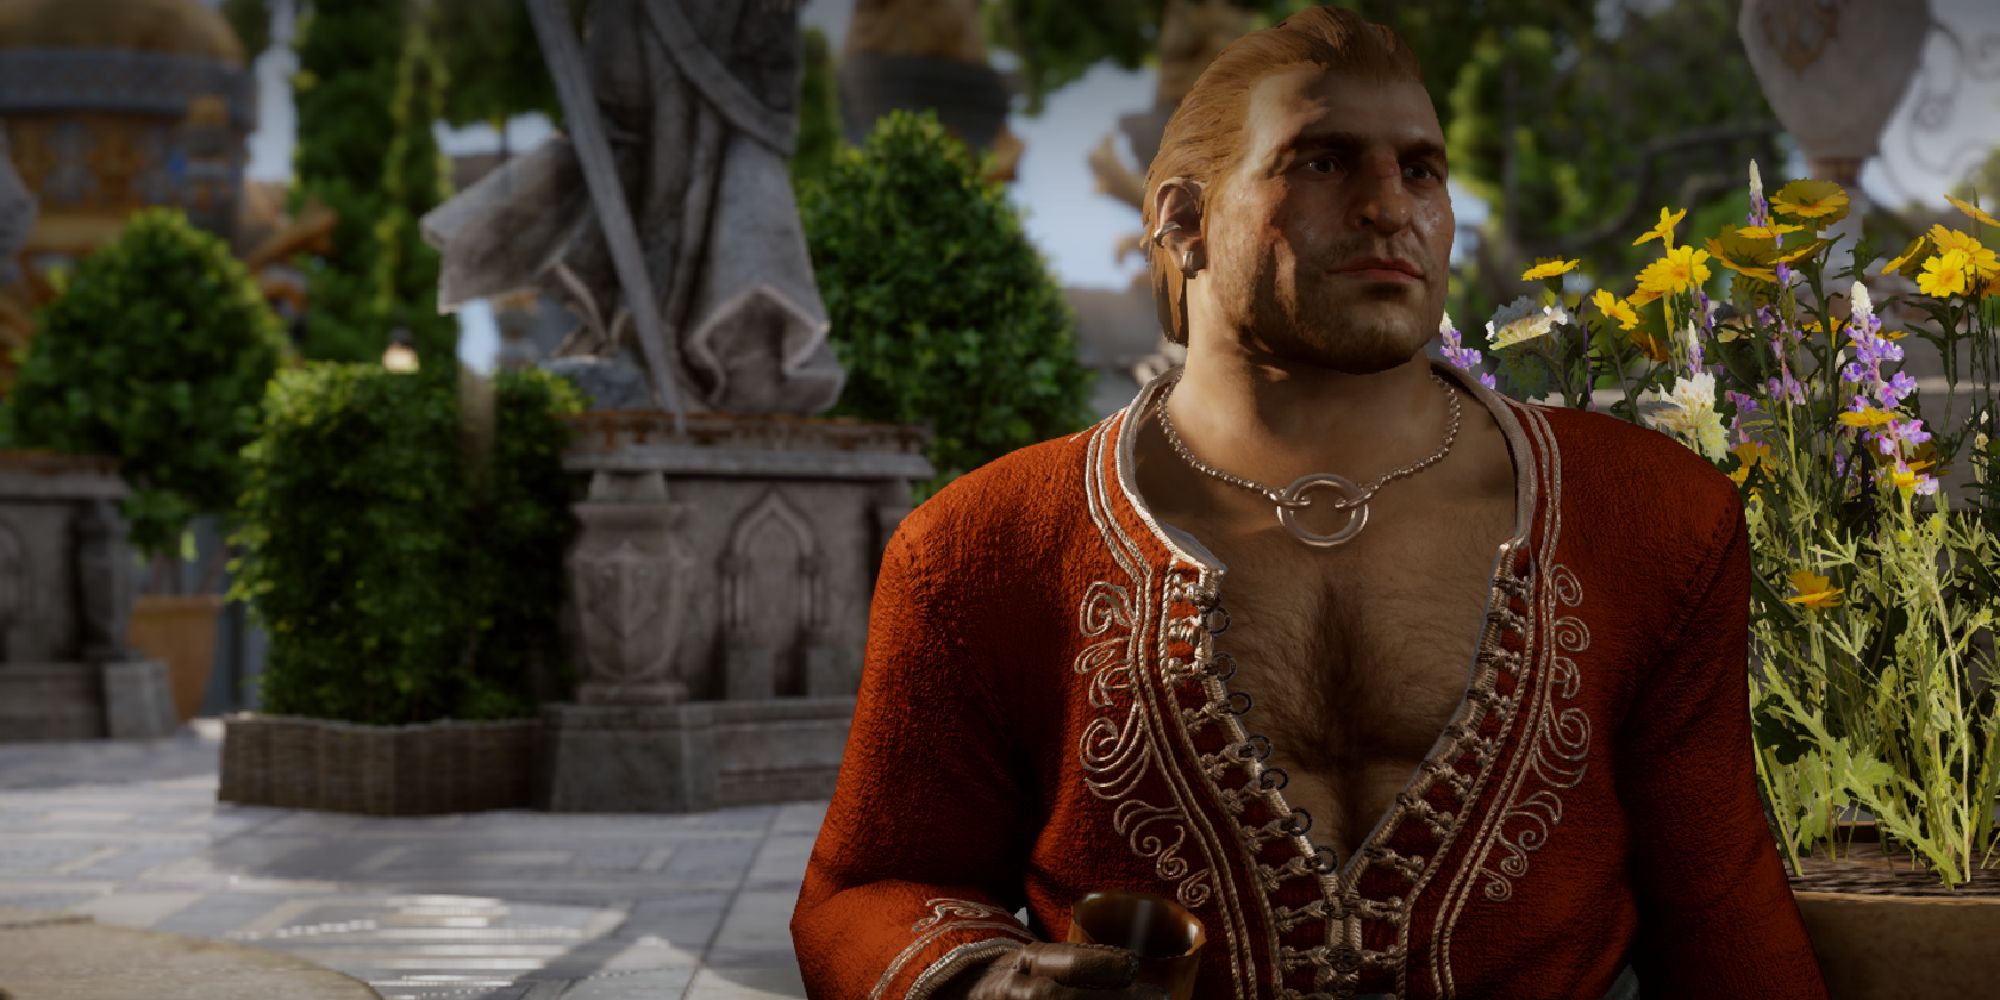 Varric as shown in Inquisiton in his signature red unbuttoned shirt, holding a golden chalice, standing in a palatial courtyard of stone and flowers